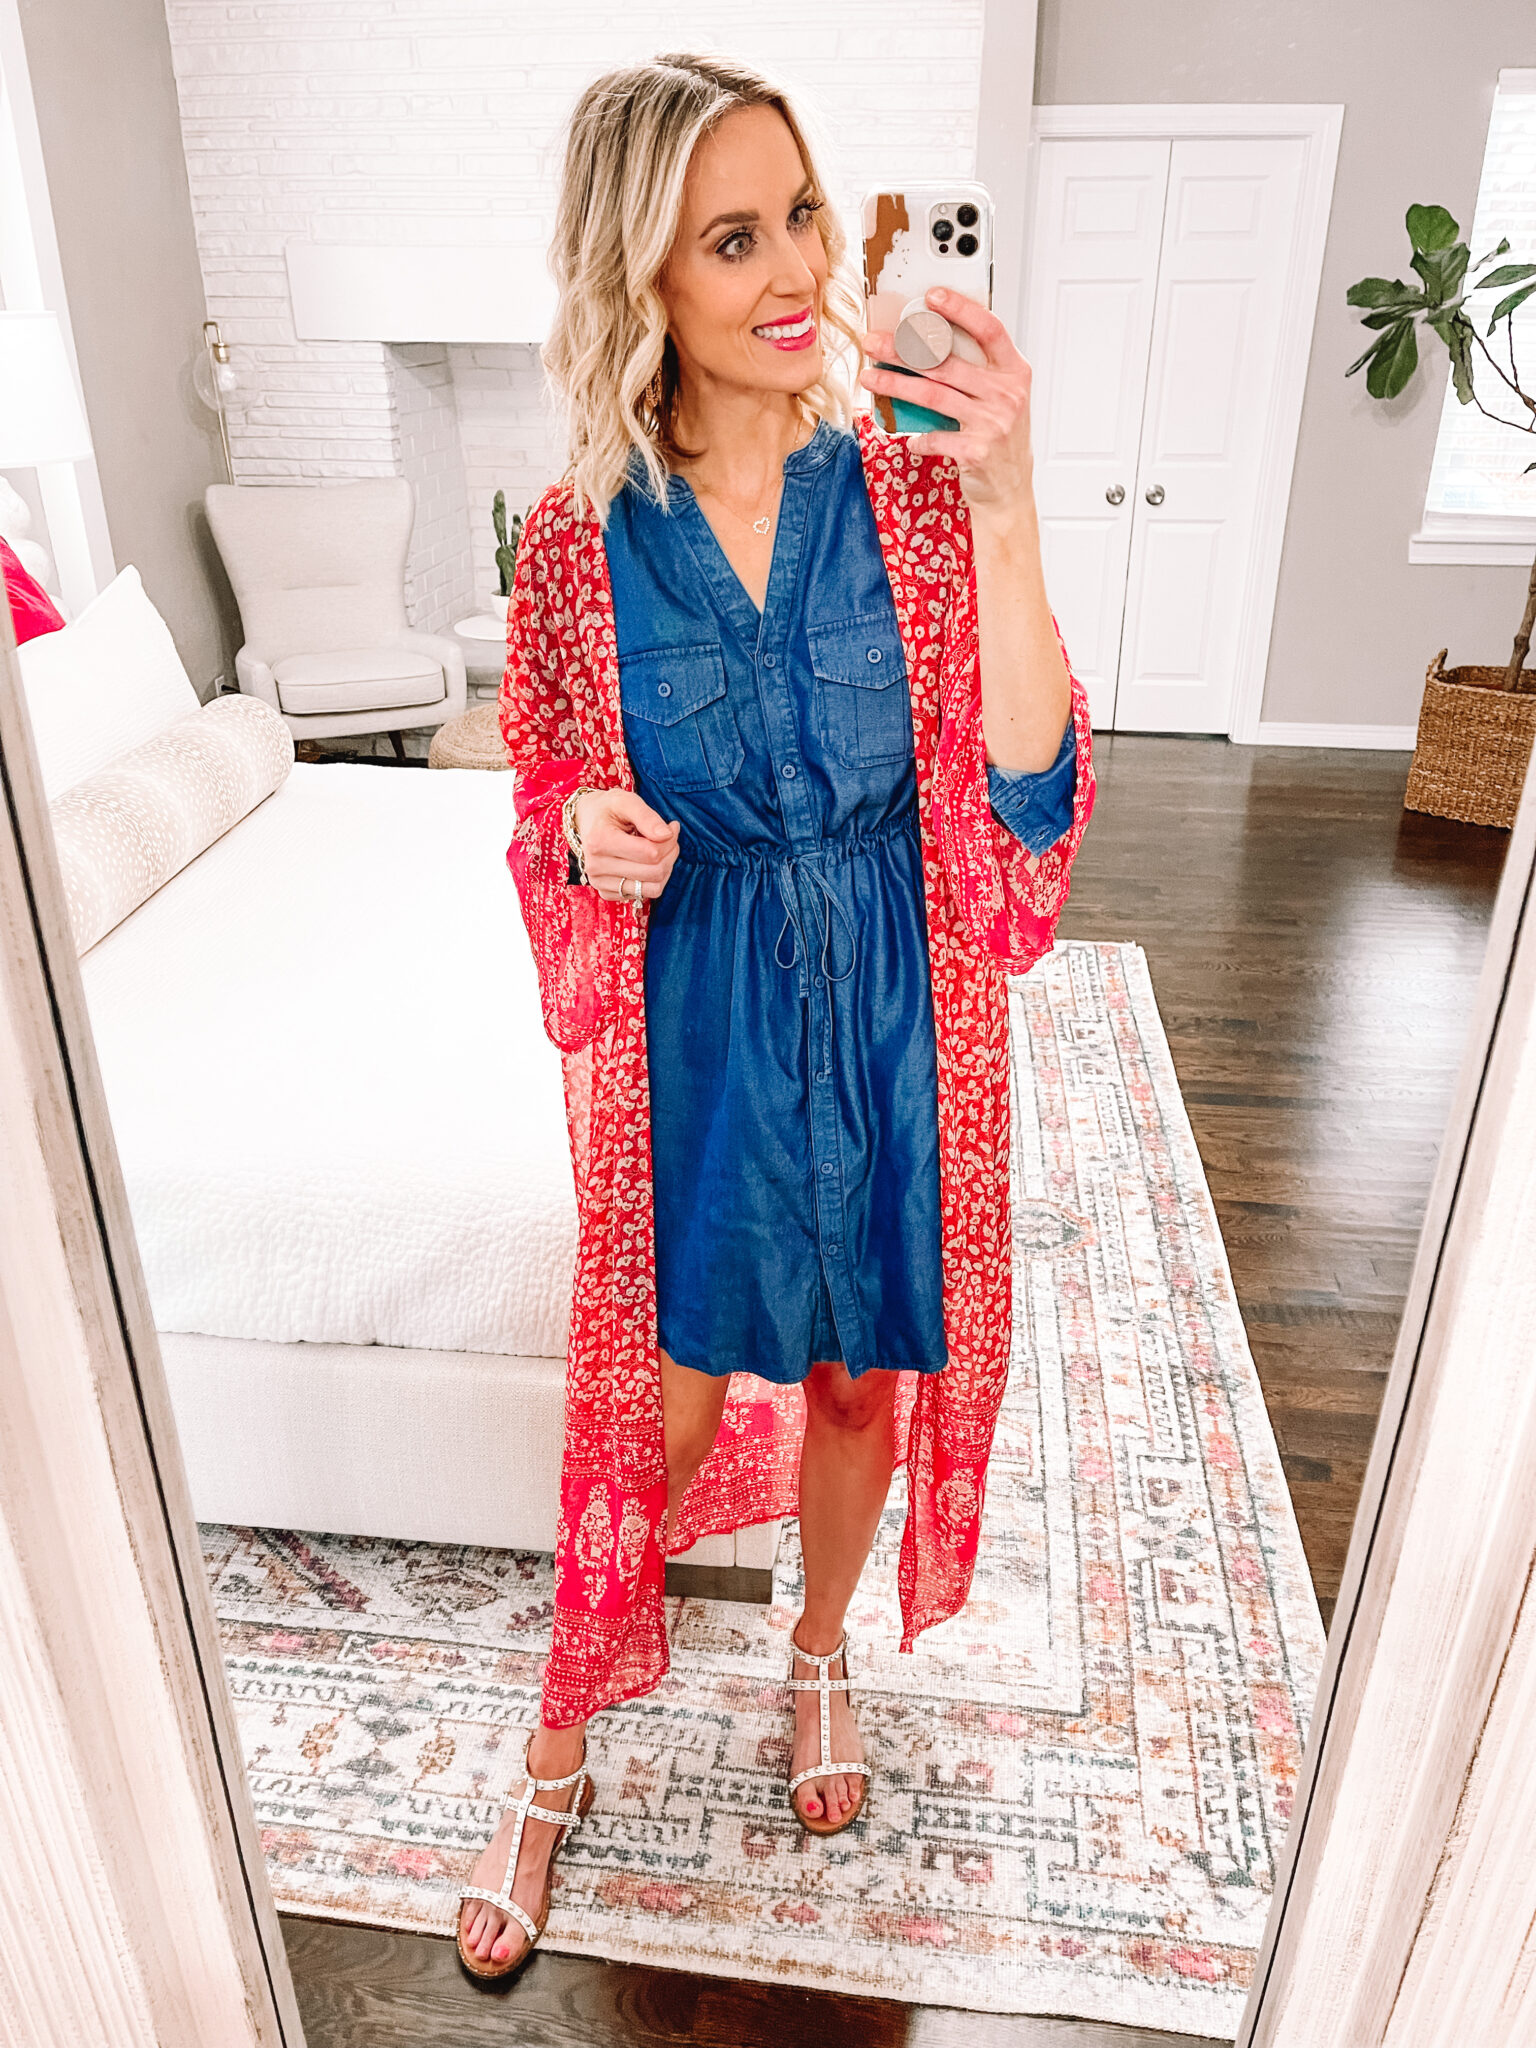 6 Ways to Wear a Chambray Dress - Straight A Style